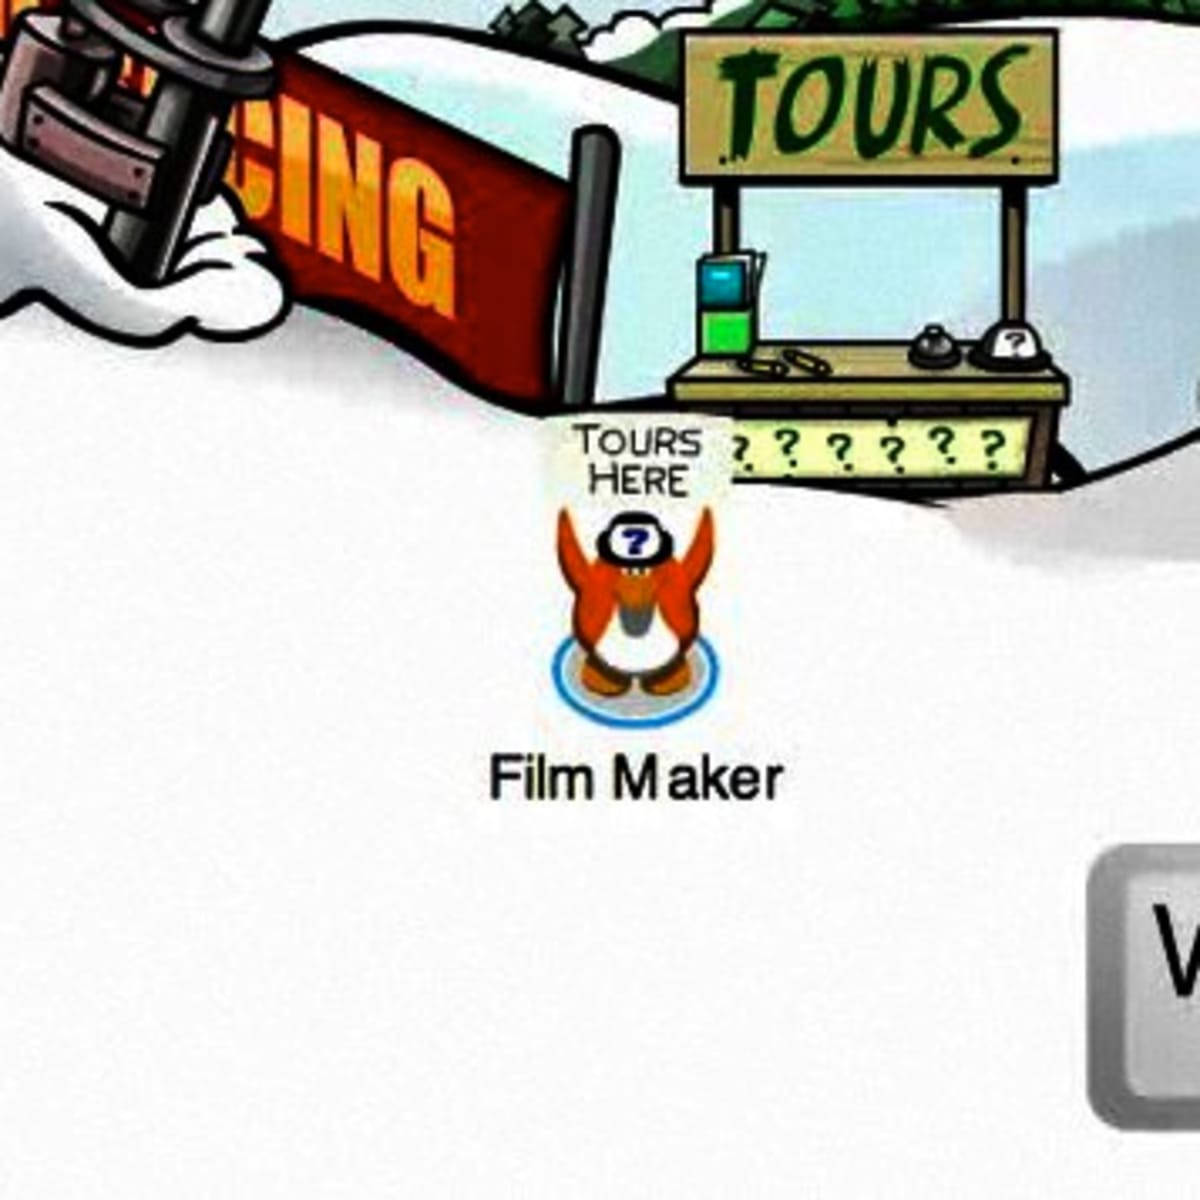 8 years ago today, the Ski Lodge room was renovated. : r/ClubPenguin